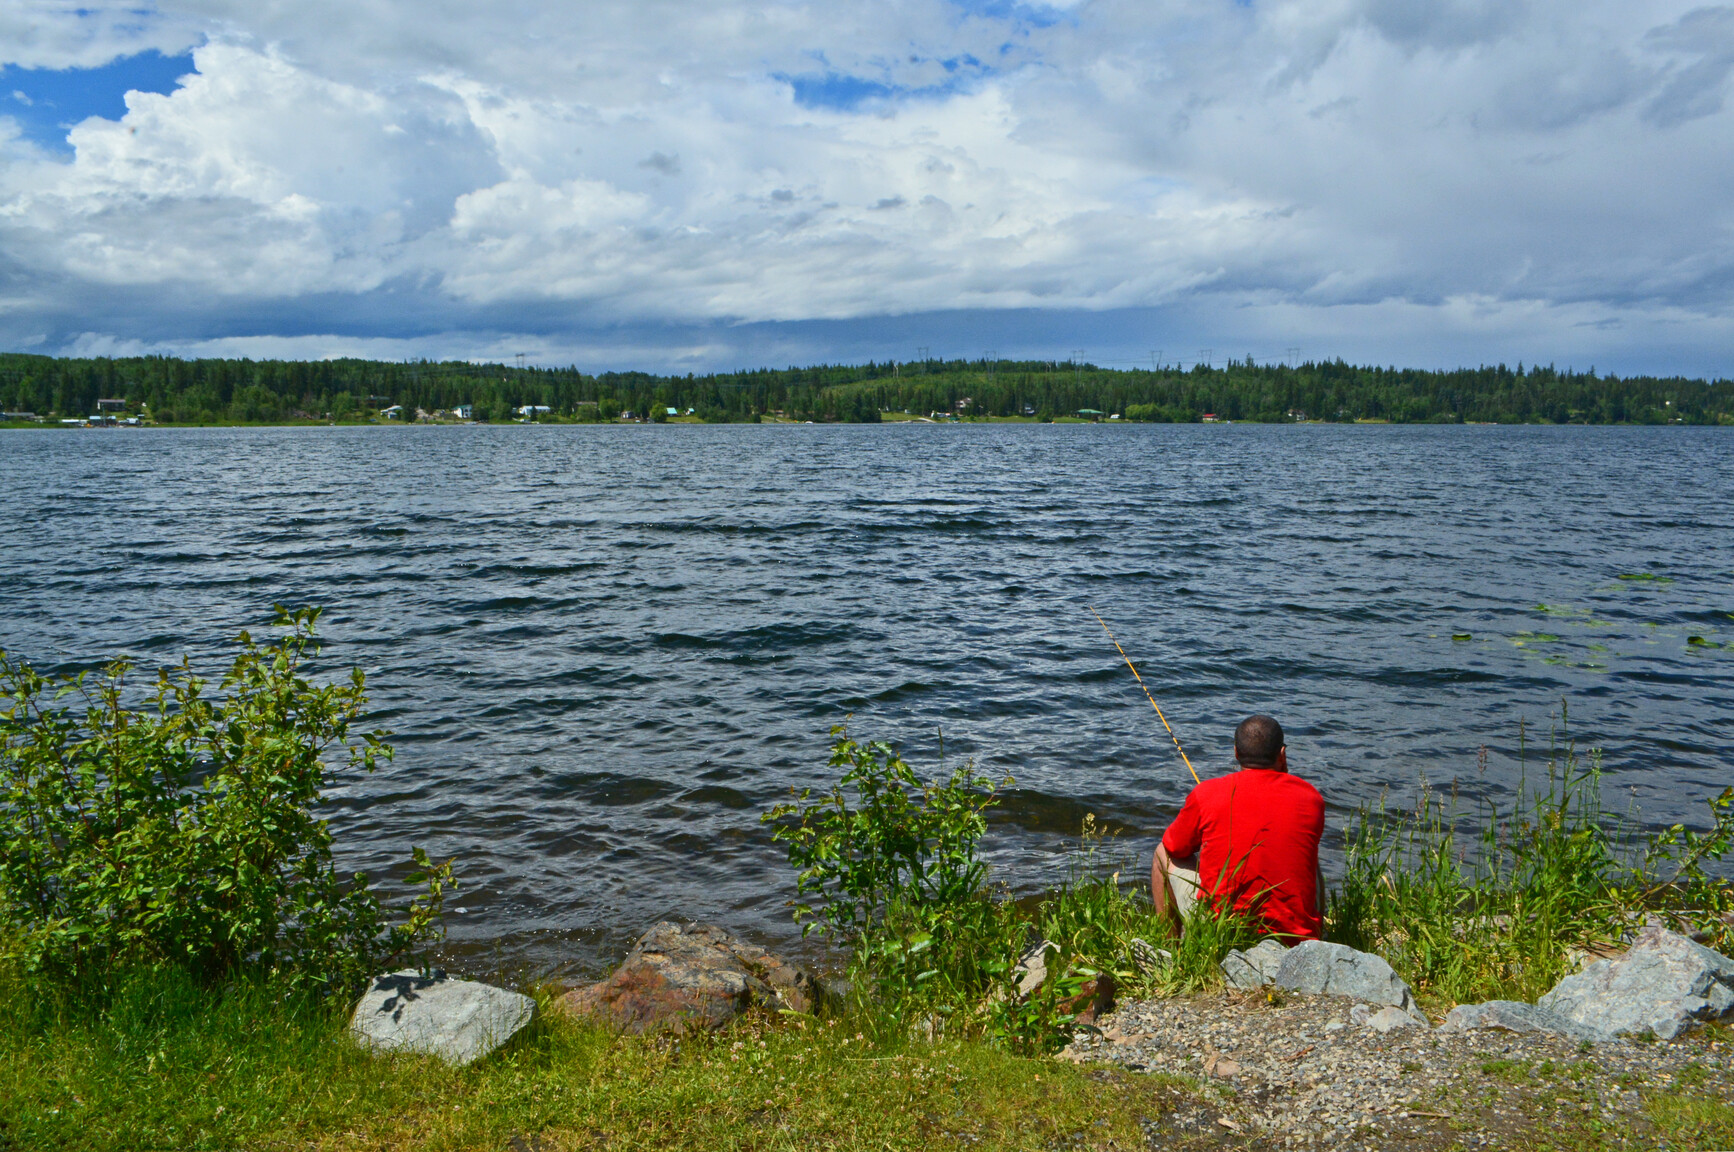 A park visitor fishing from the shore of the lake. Across the lake are homes and forest.